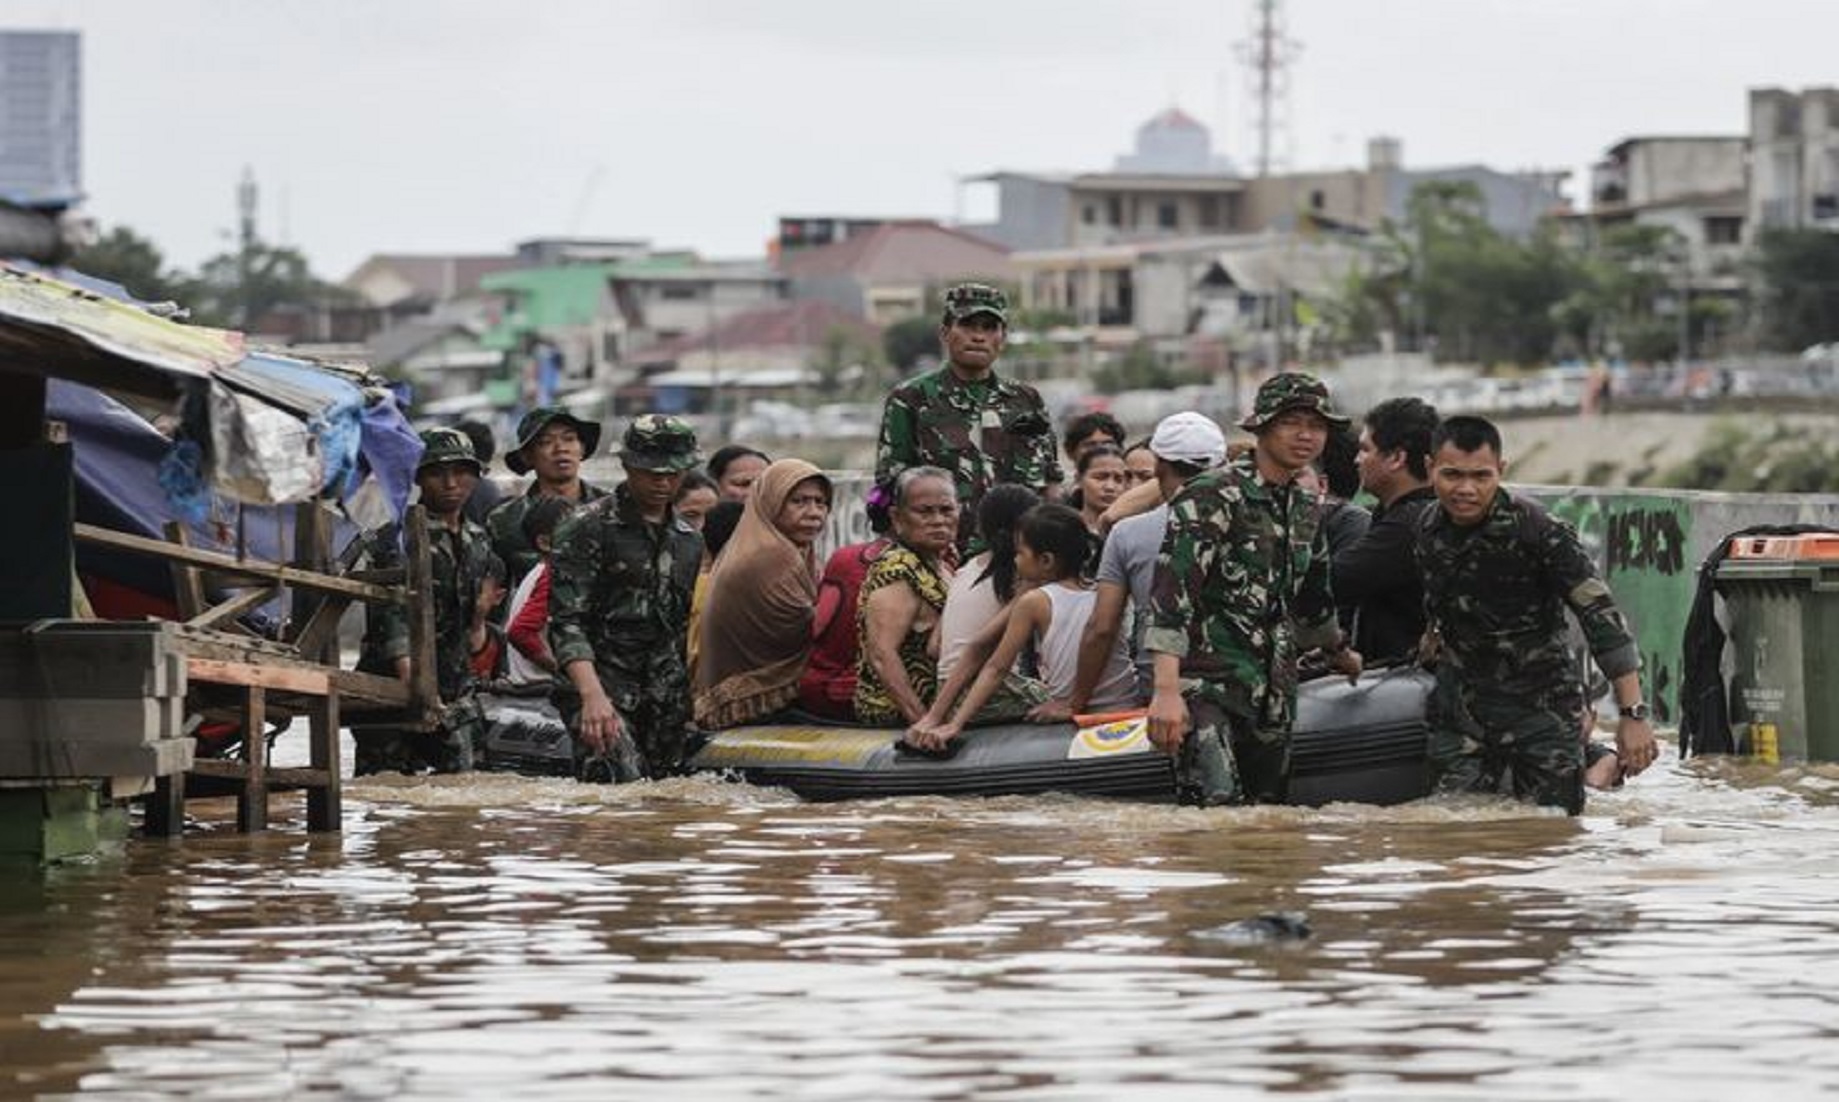 Floods Submerge Thousands Of Houses In Indonesia’s Kalimantan